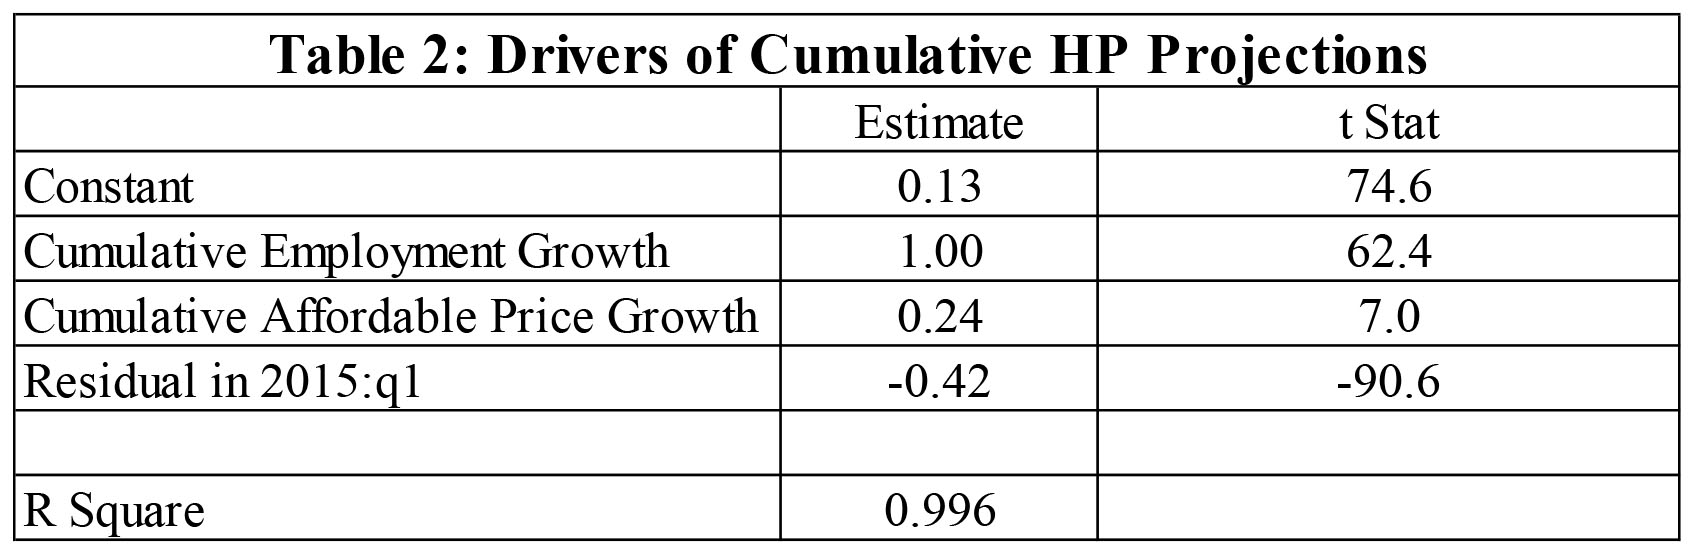 Table 2 - Drivers of Cumulaitive HP Projections